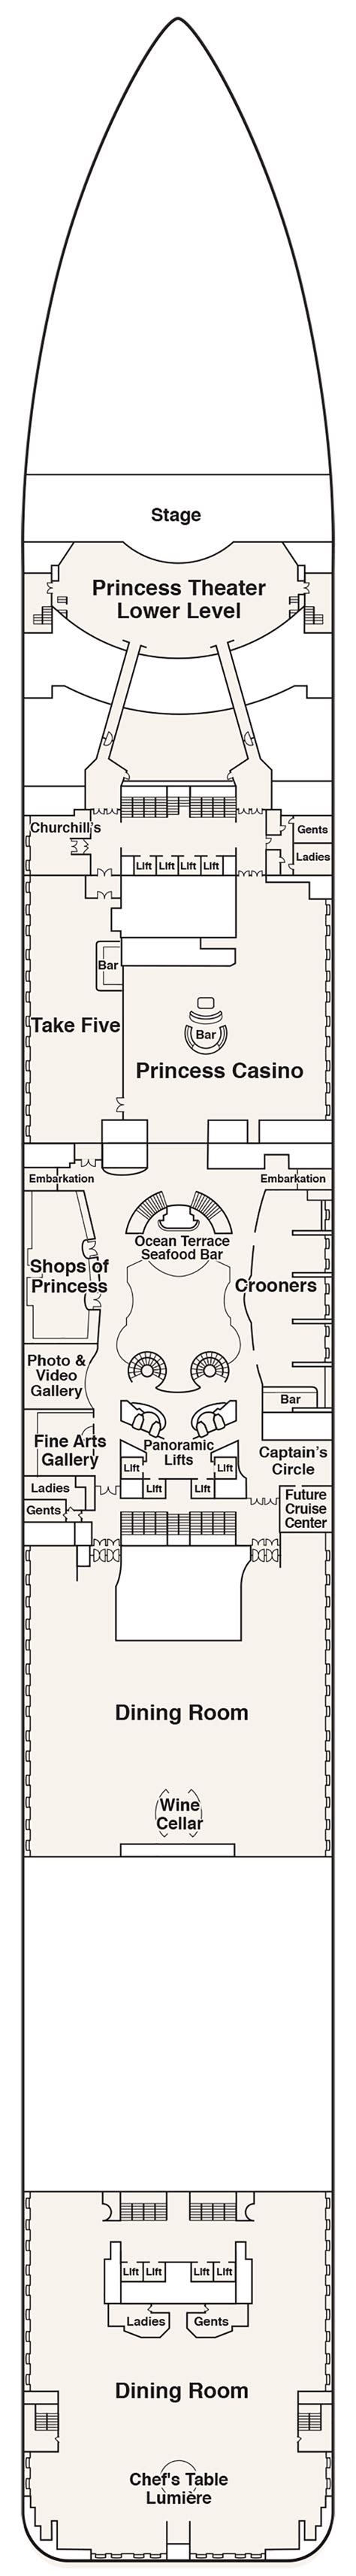 Discovery Princess Deck Plans Planet Cruise